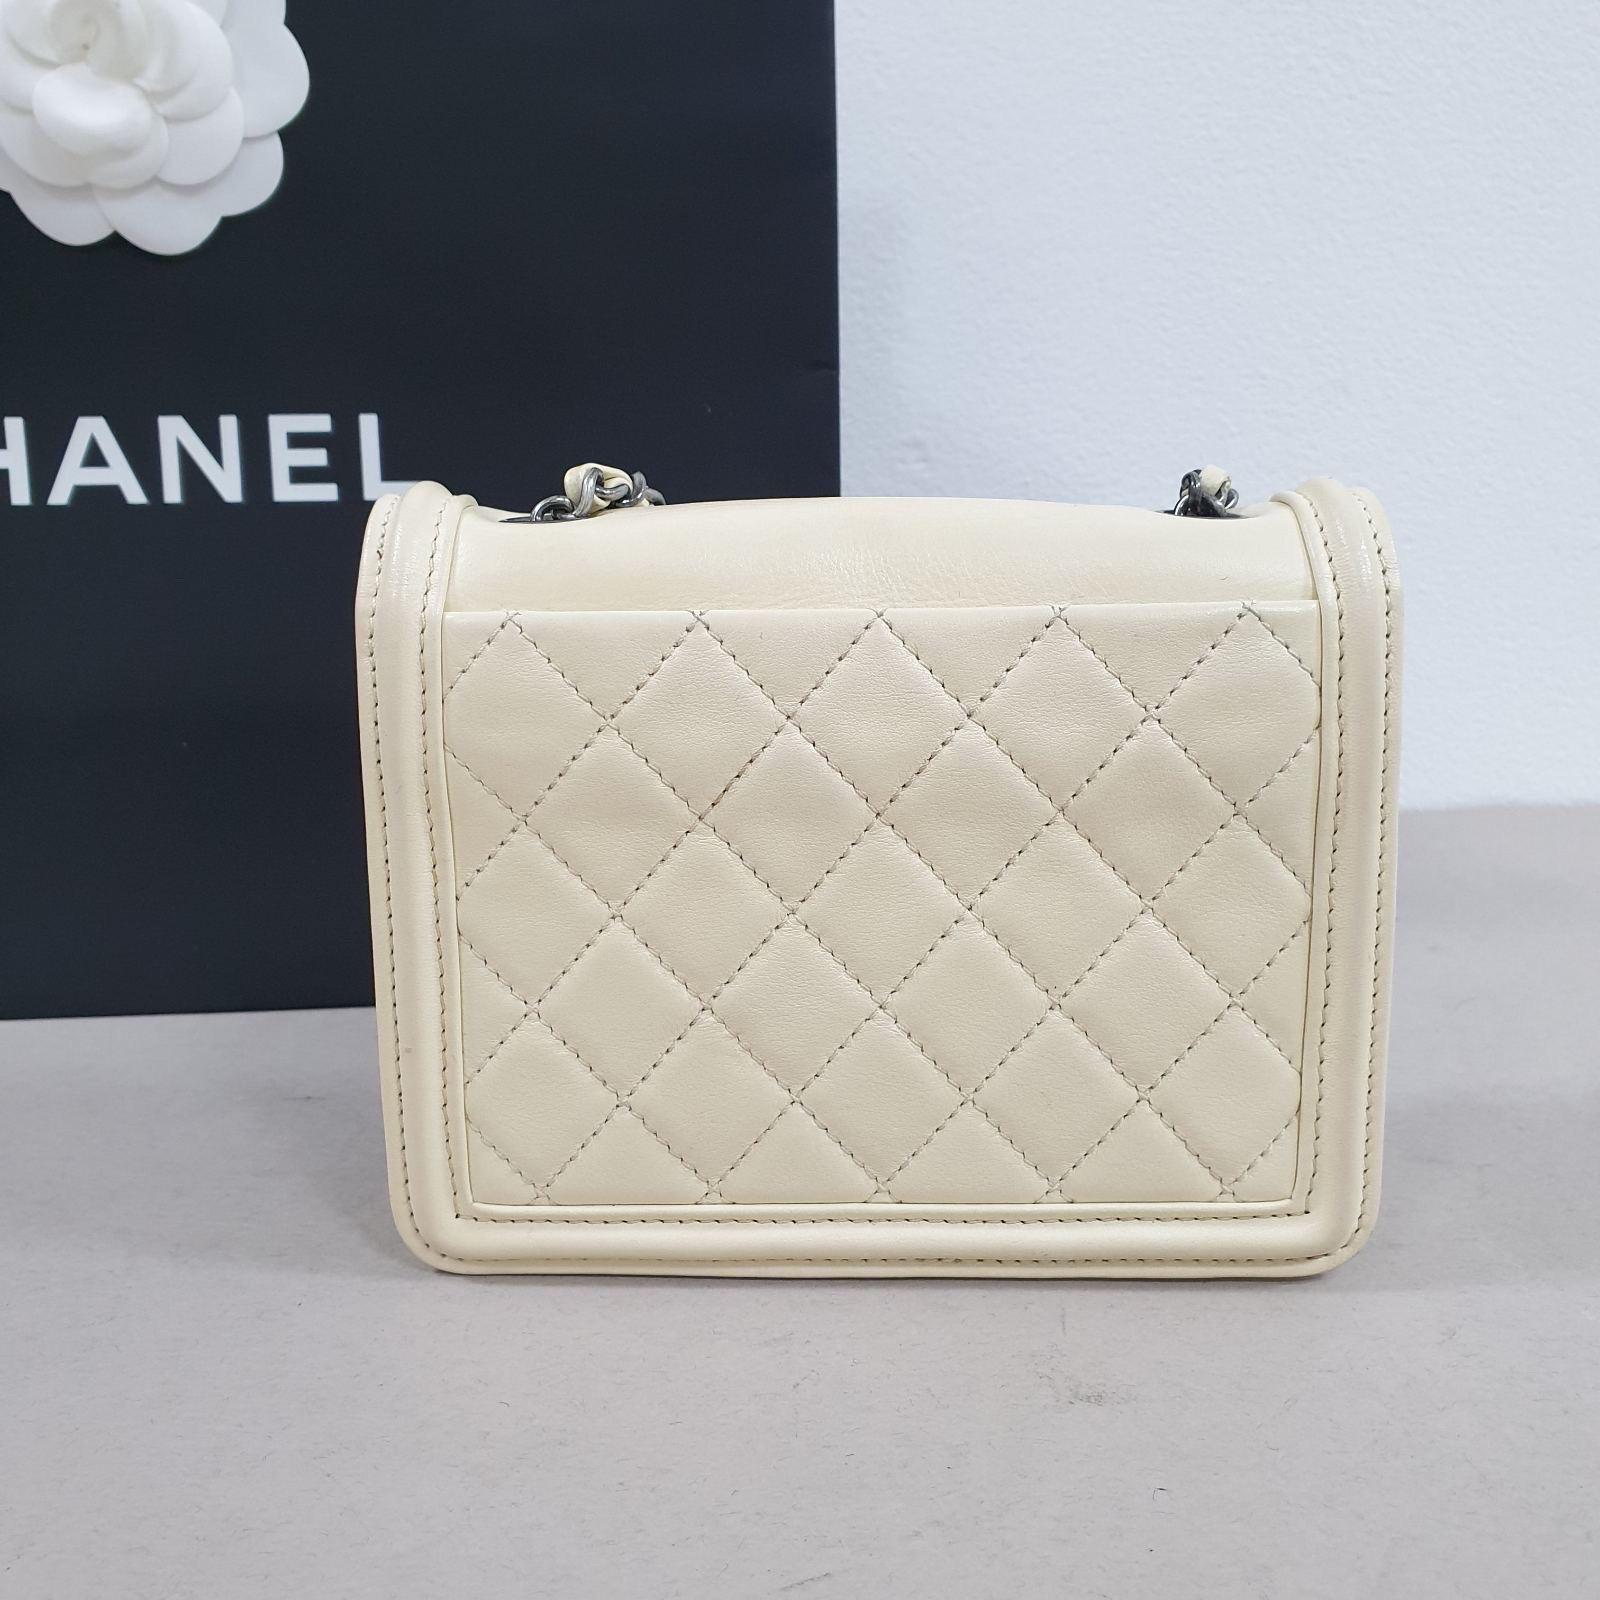 A timeless classic that never goes out of style, the flap bag from Chanel .
The design was revolutionary for its time, giving its wearers the freedom to carry their everyday must-haves without the cumbersome nature of a larger bag. 
The bag features